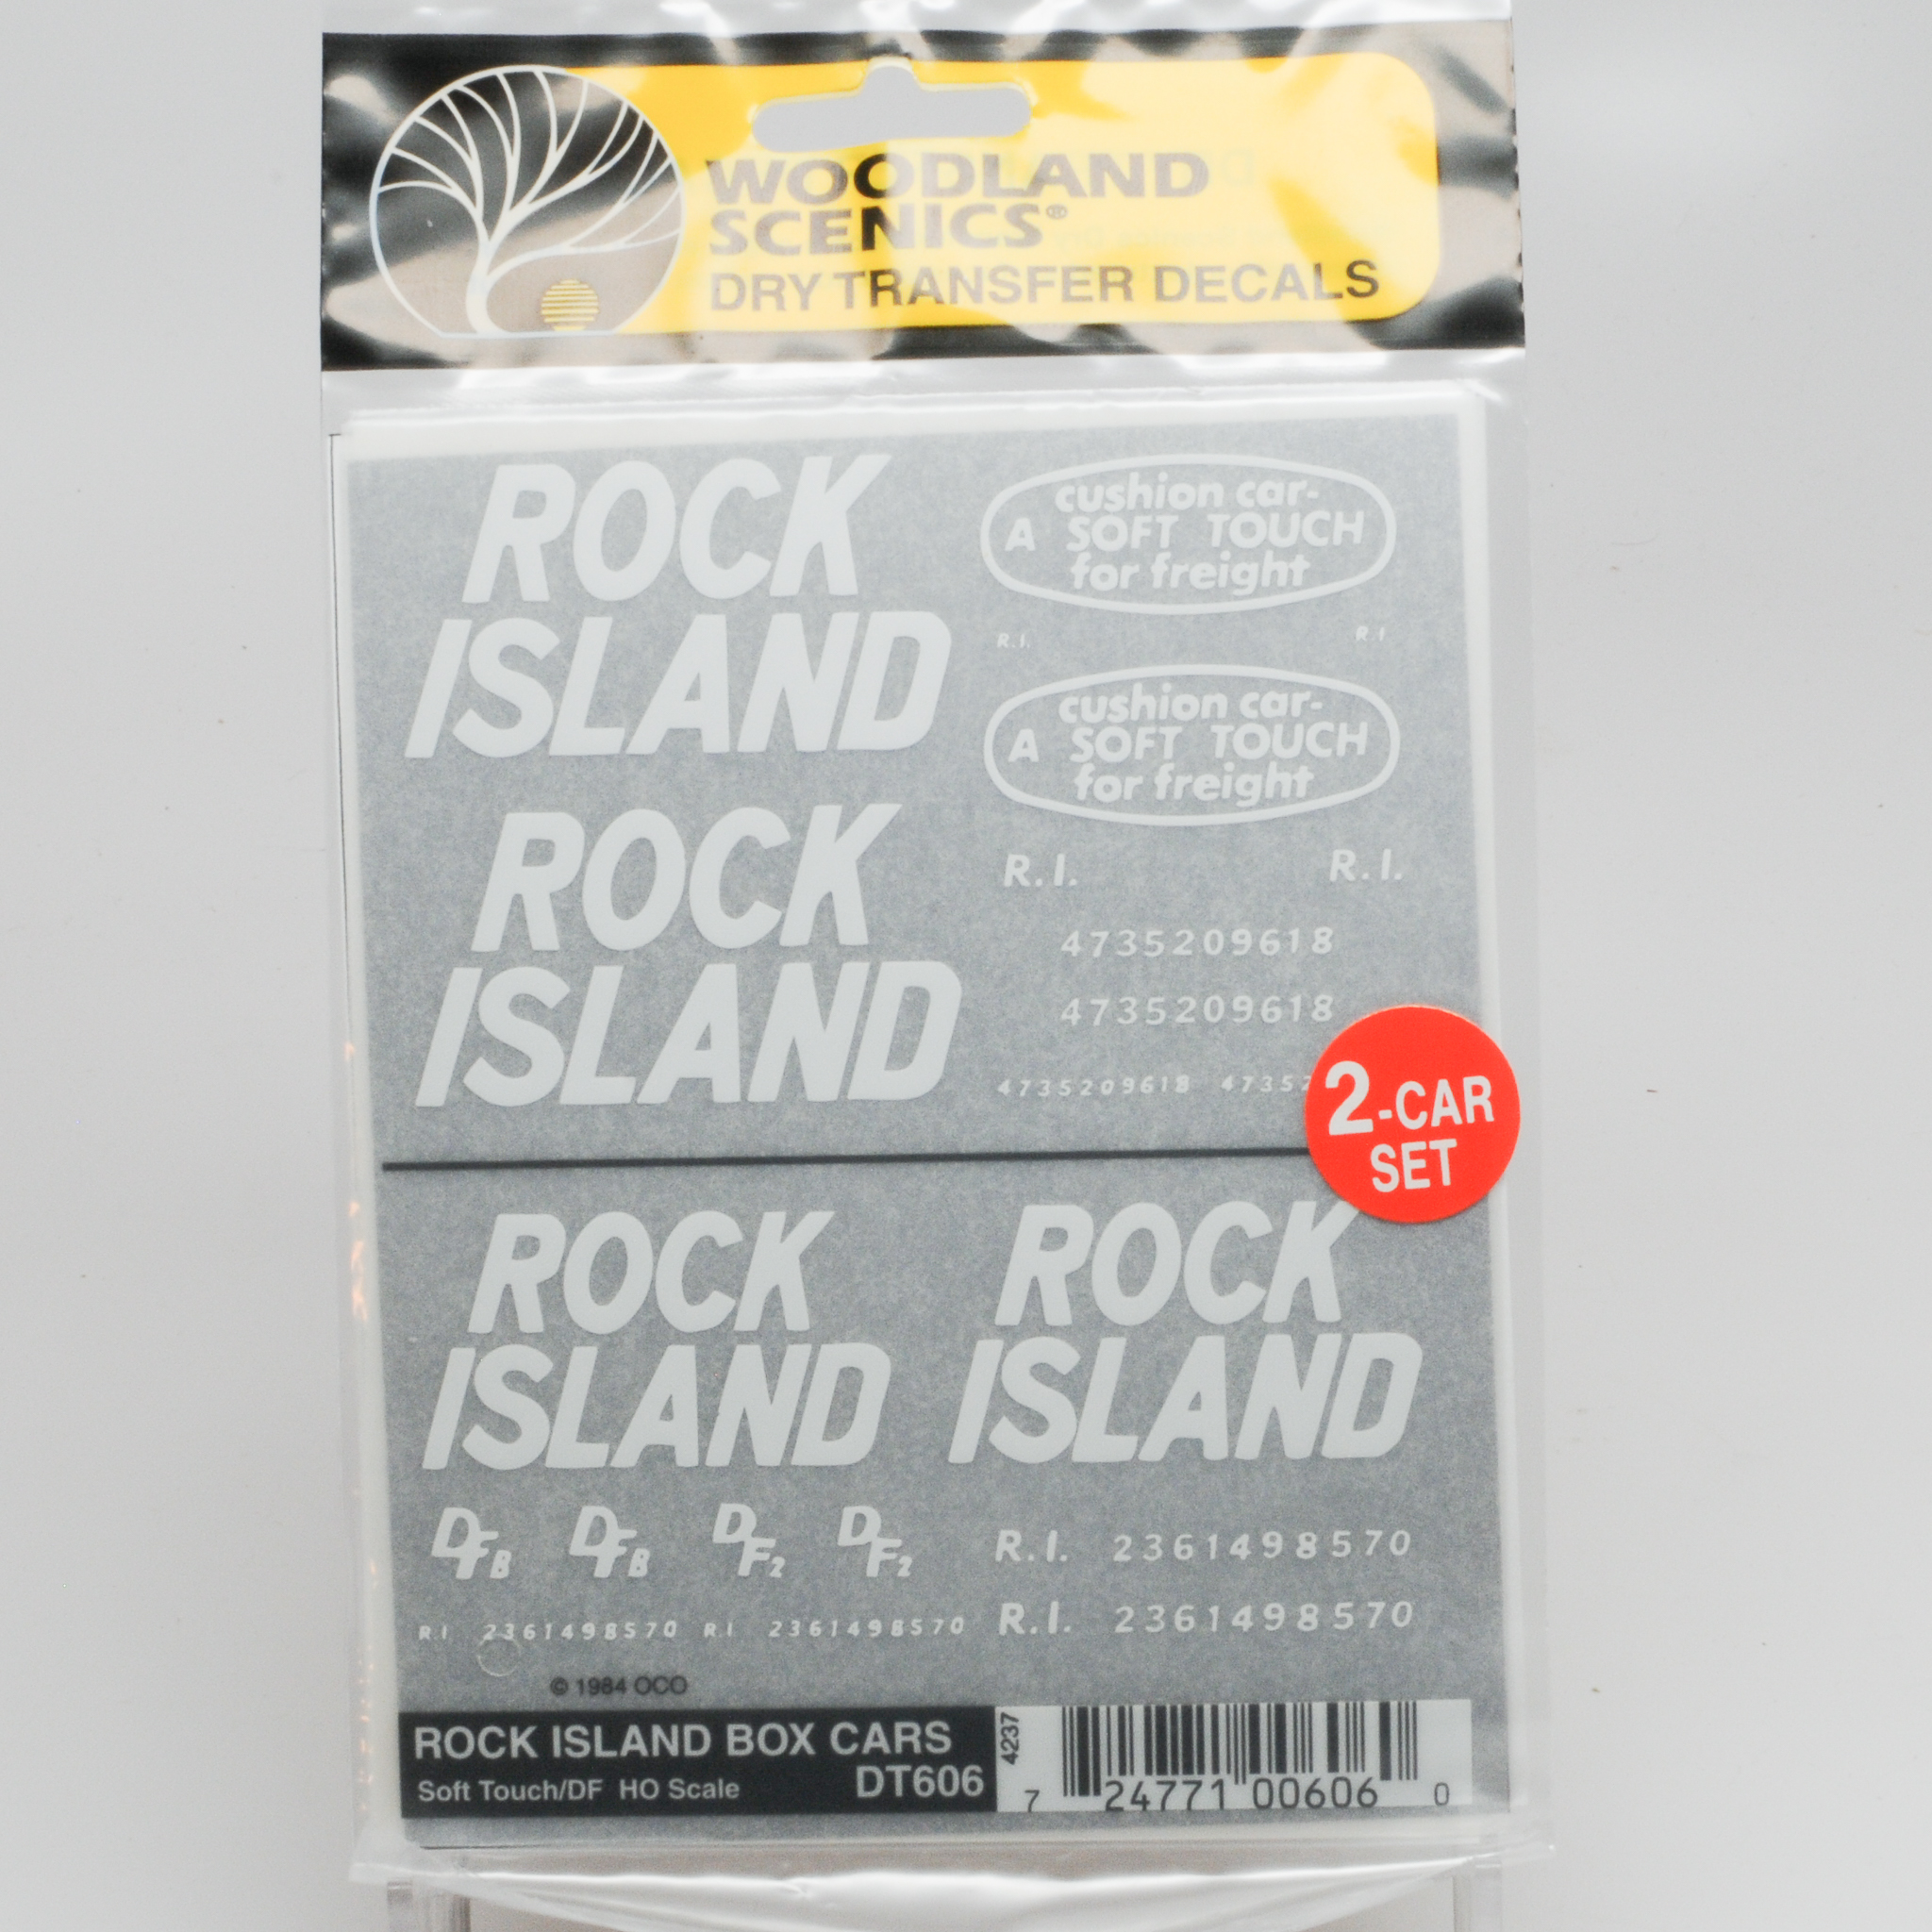 Woodland+Scenics+Dry+Transfer+Decals+Rock+Island+Box+Cars picture 1